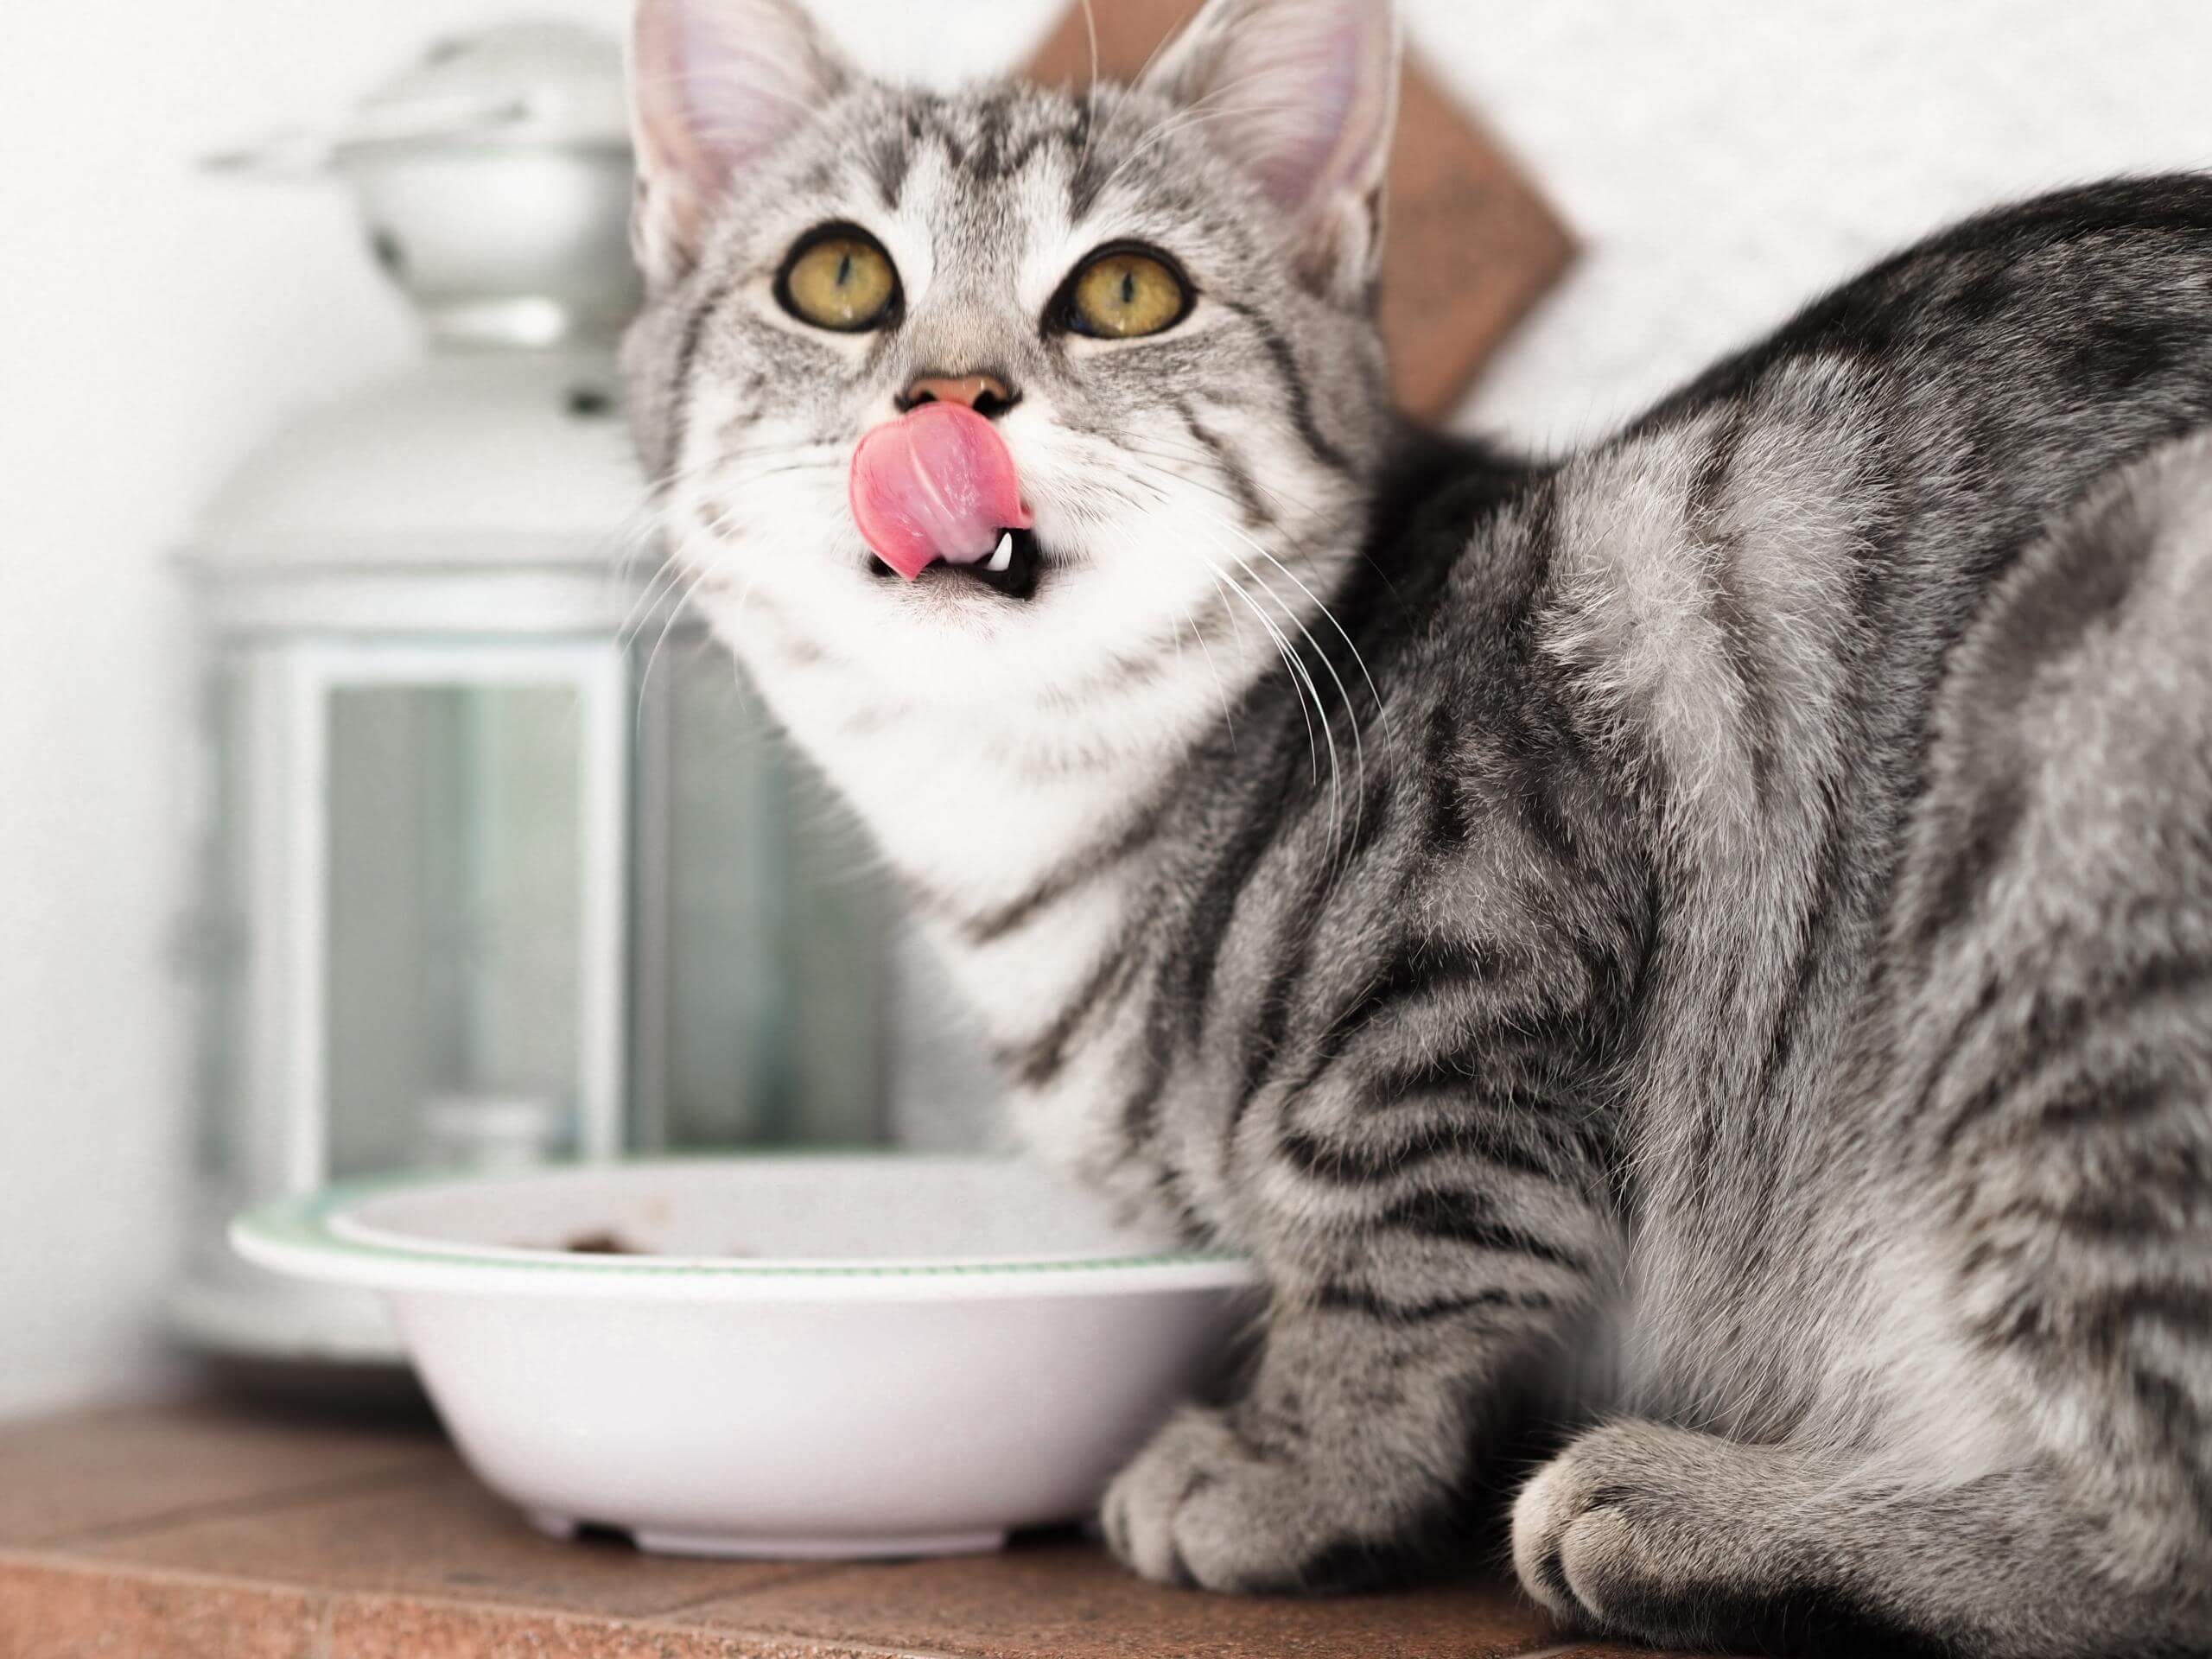 Silver tabby licking it's lips while crouched over a white dish.